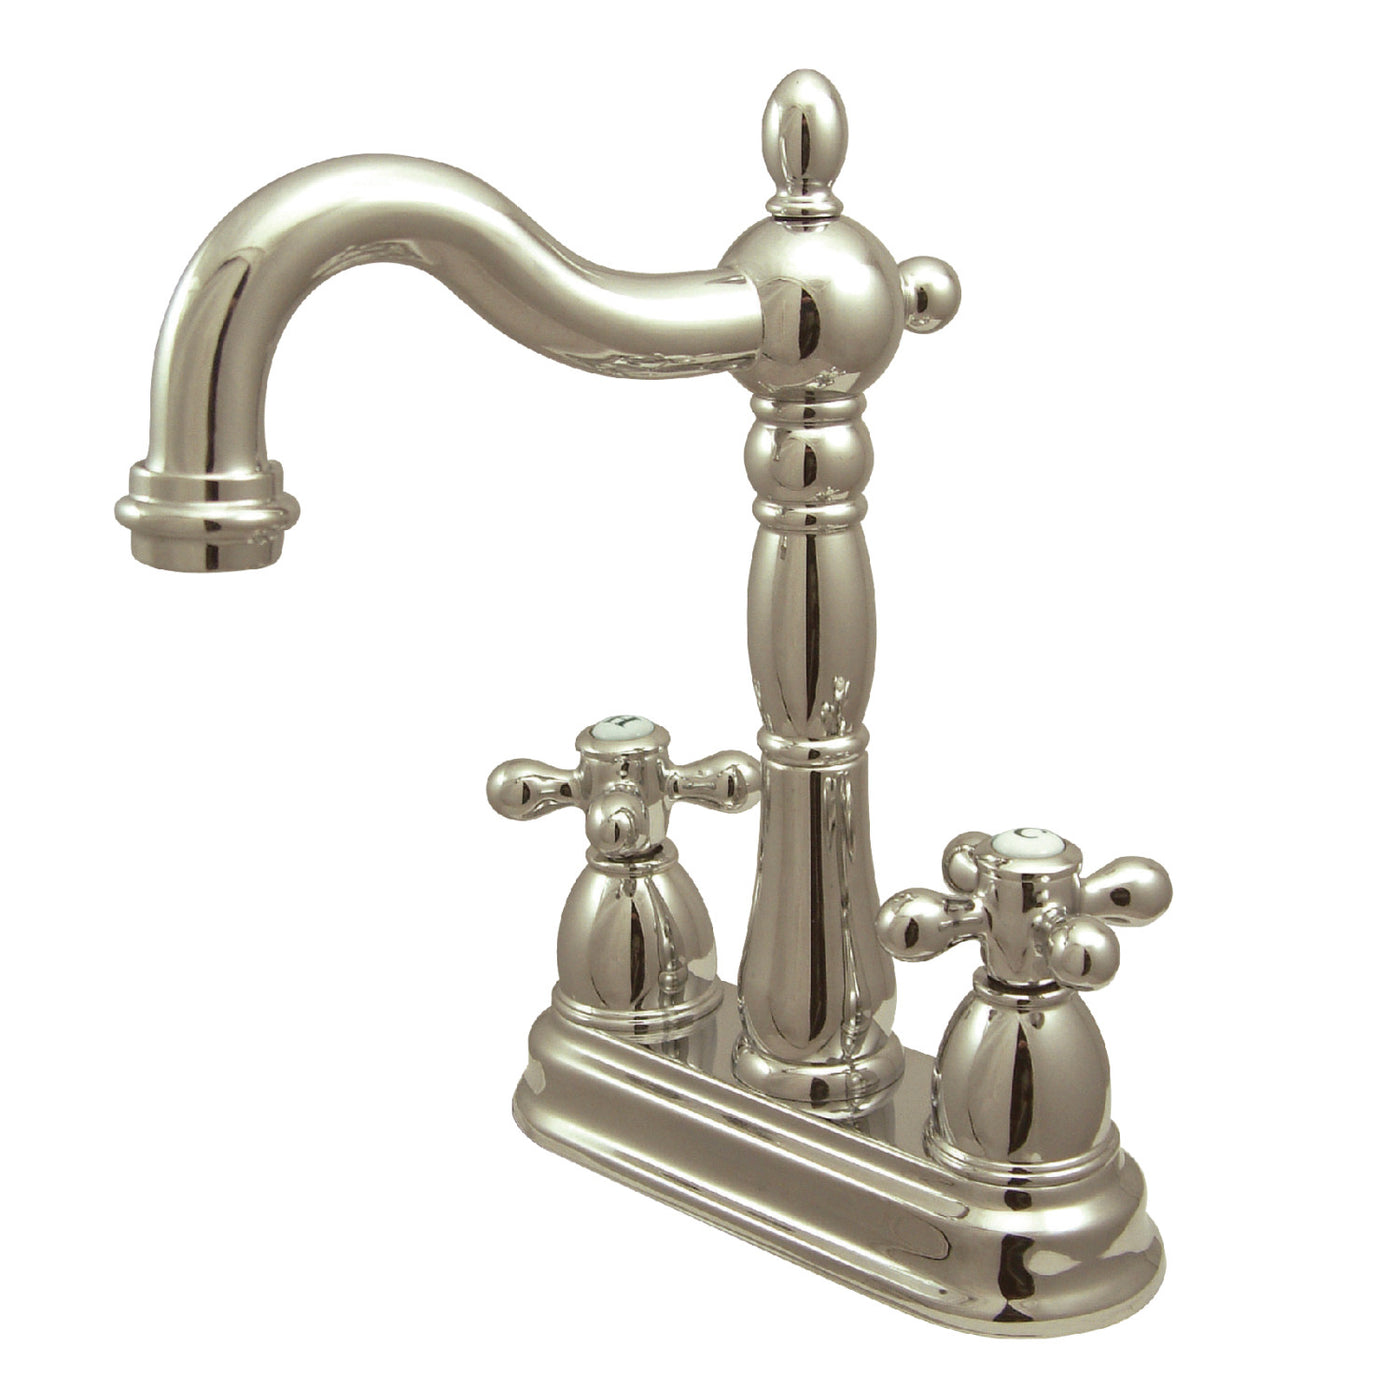 Elements of Design EB1496AX 4-Inch Centerset Bar Faucet, Polished Nickel